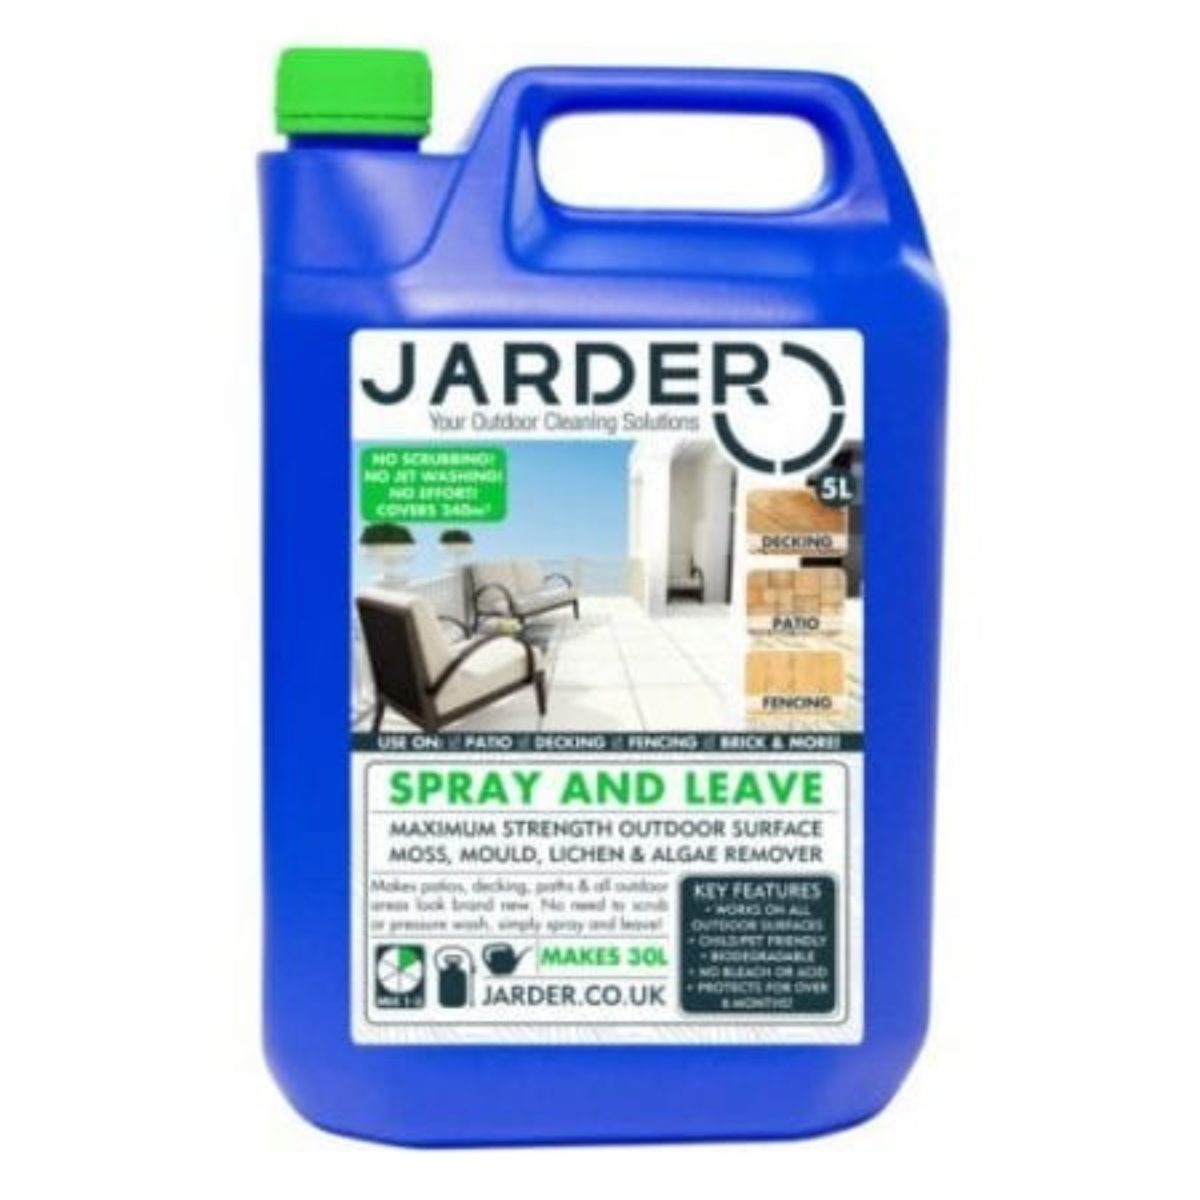 10 Best Patio Cleaner Reviews The Top Rated Models In 2020 in size 1200 X 1200